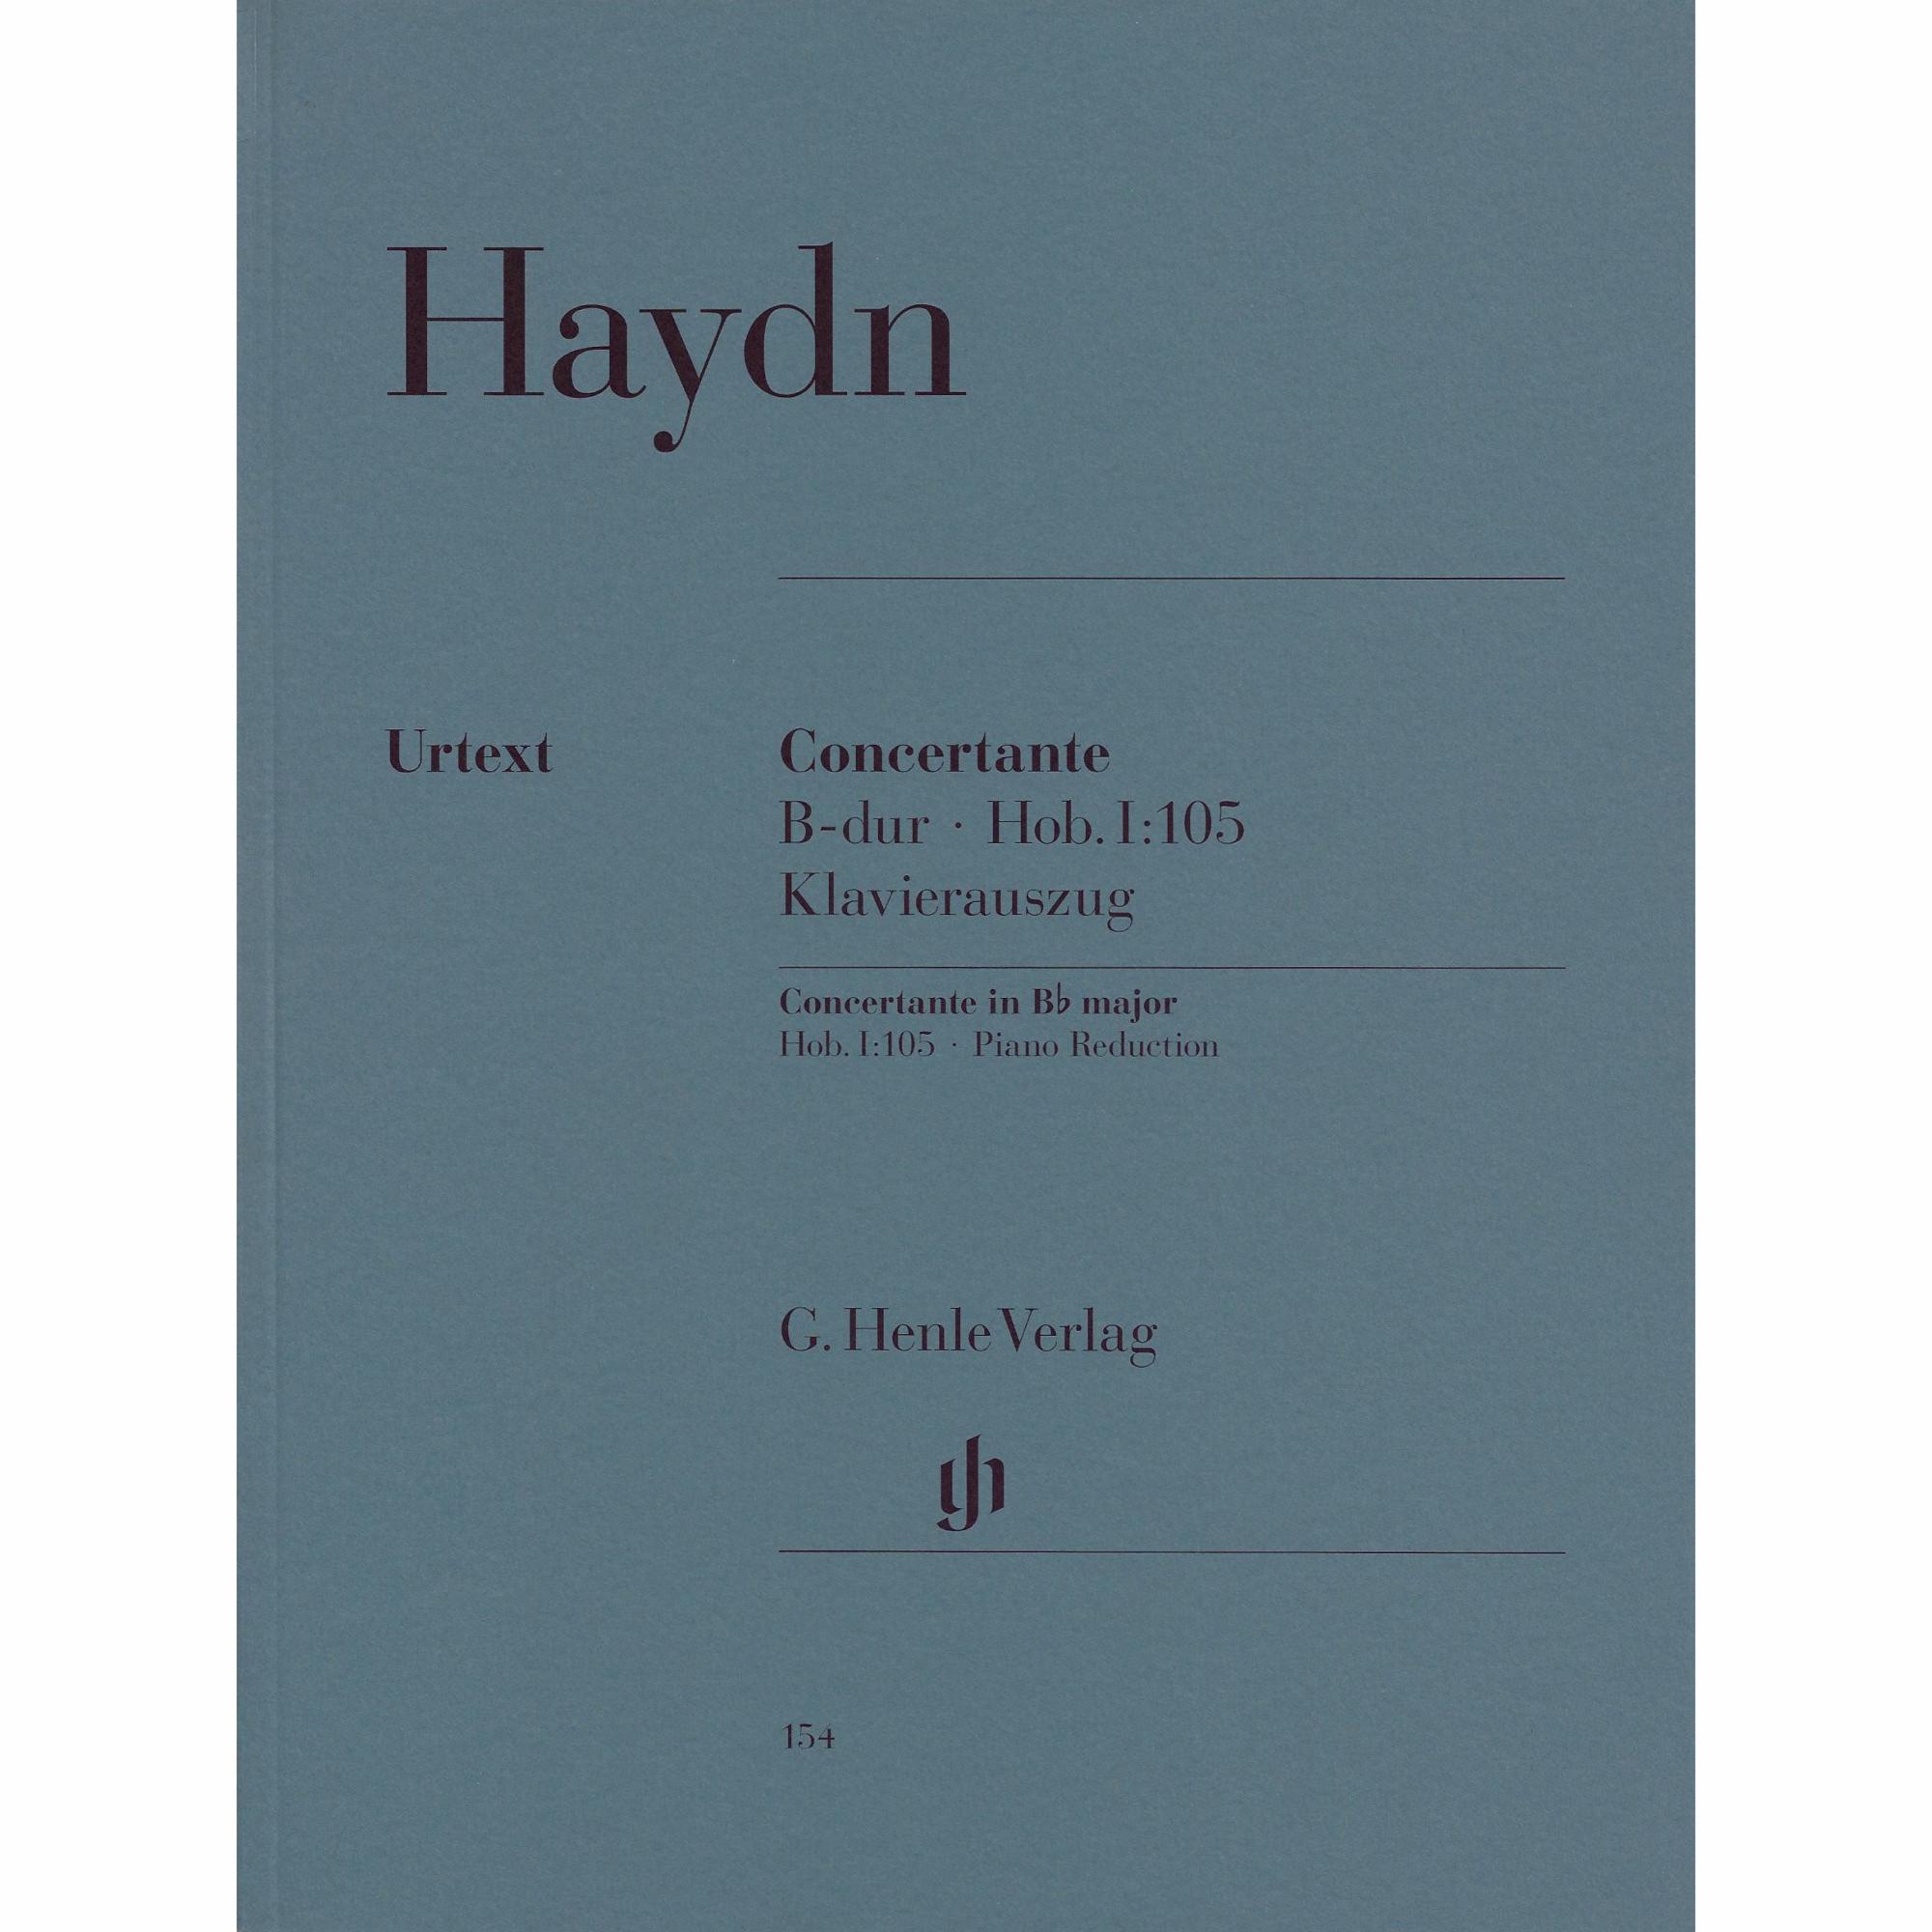 Haydn -- Concertante in B-flat Major, Hob. I:105 for Oboe, Bassoon, Violin, Cello, and Piano